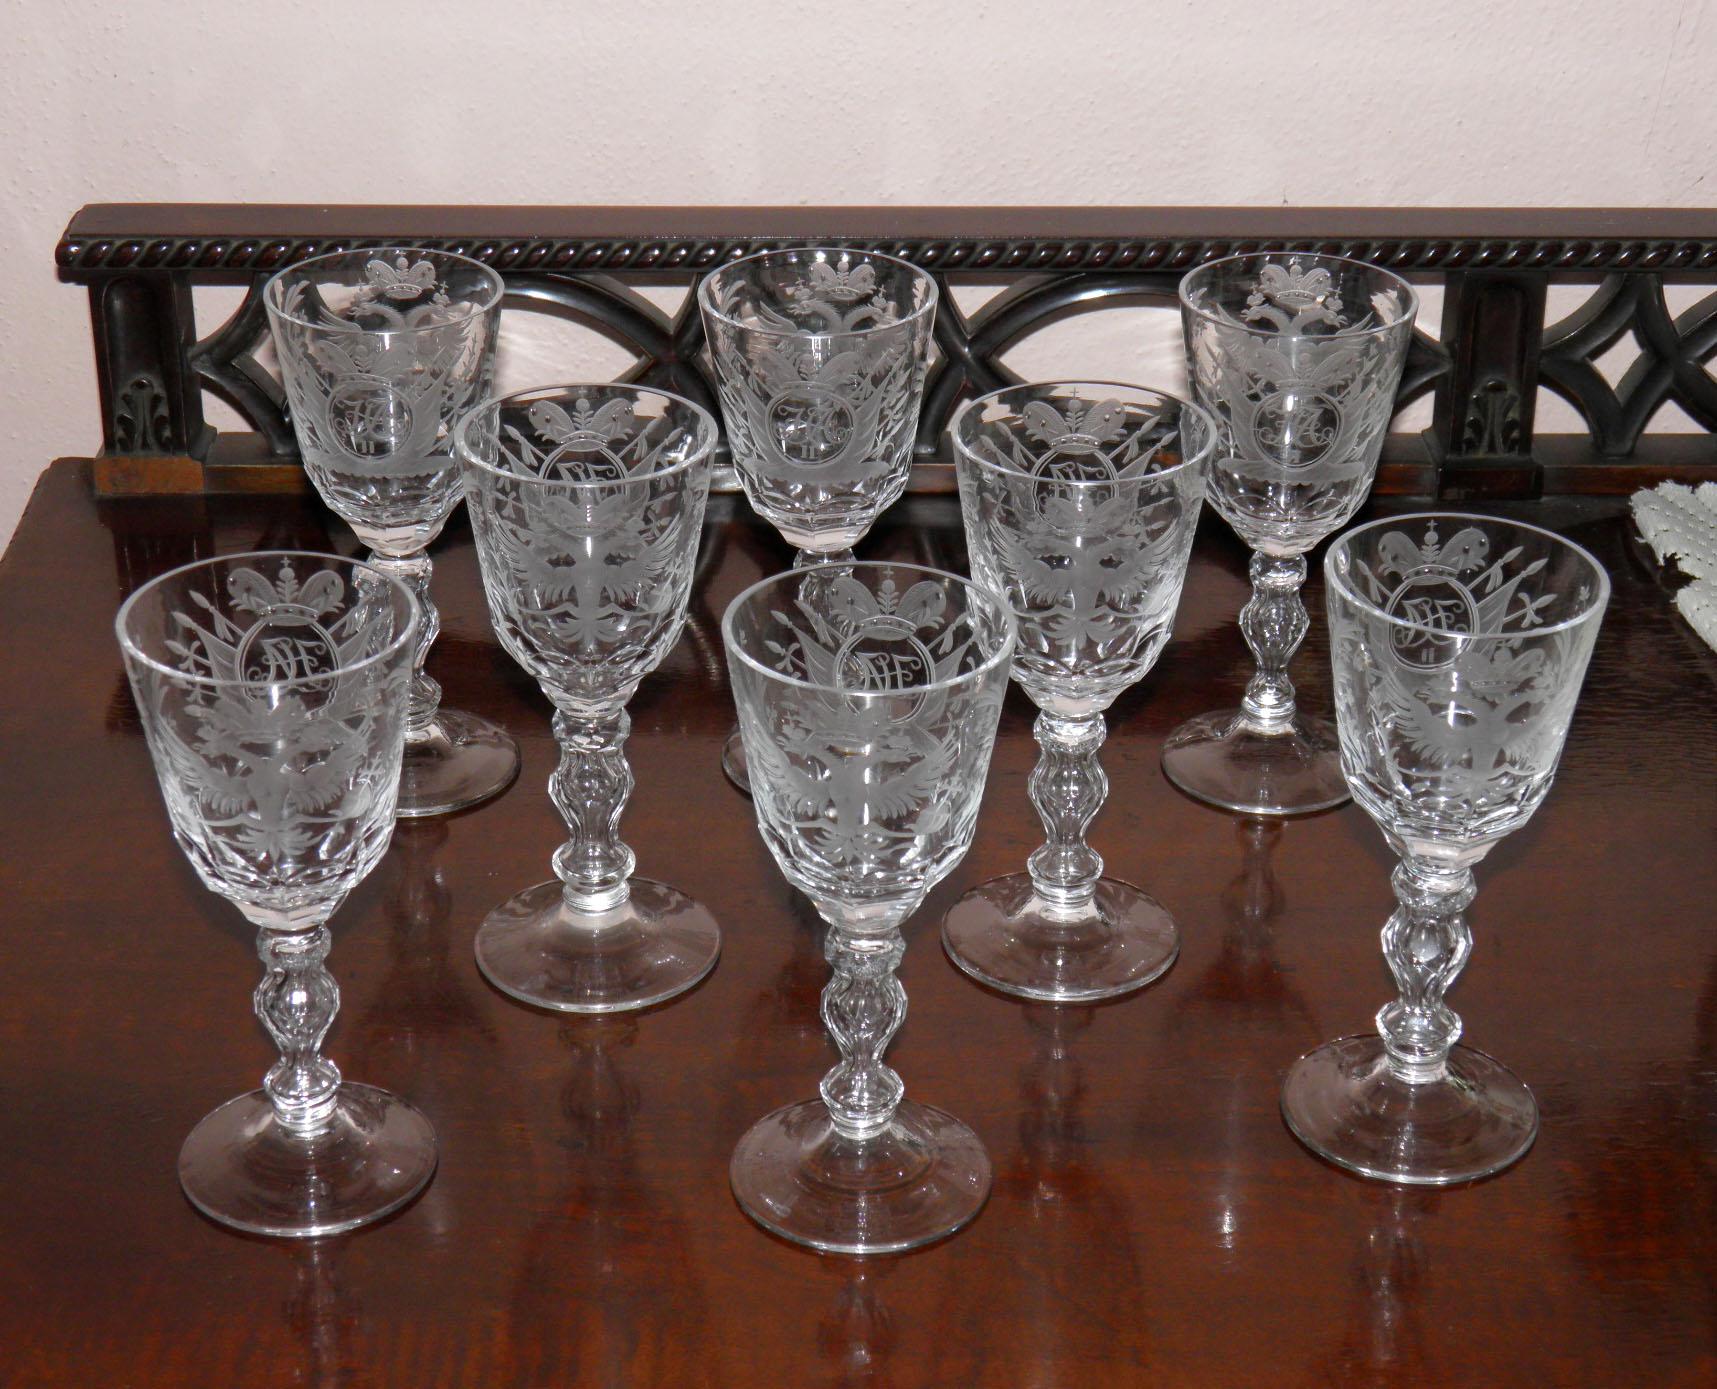 Set of 8 Pieces of Wine Glasses, Tsarist Russian Glass of the 20th Century 8